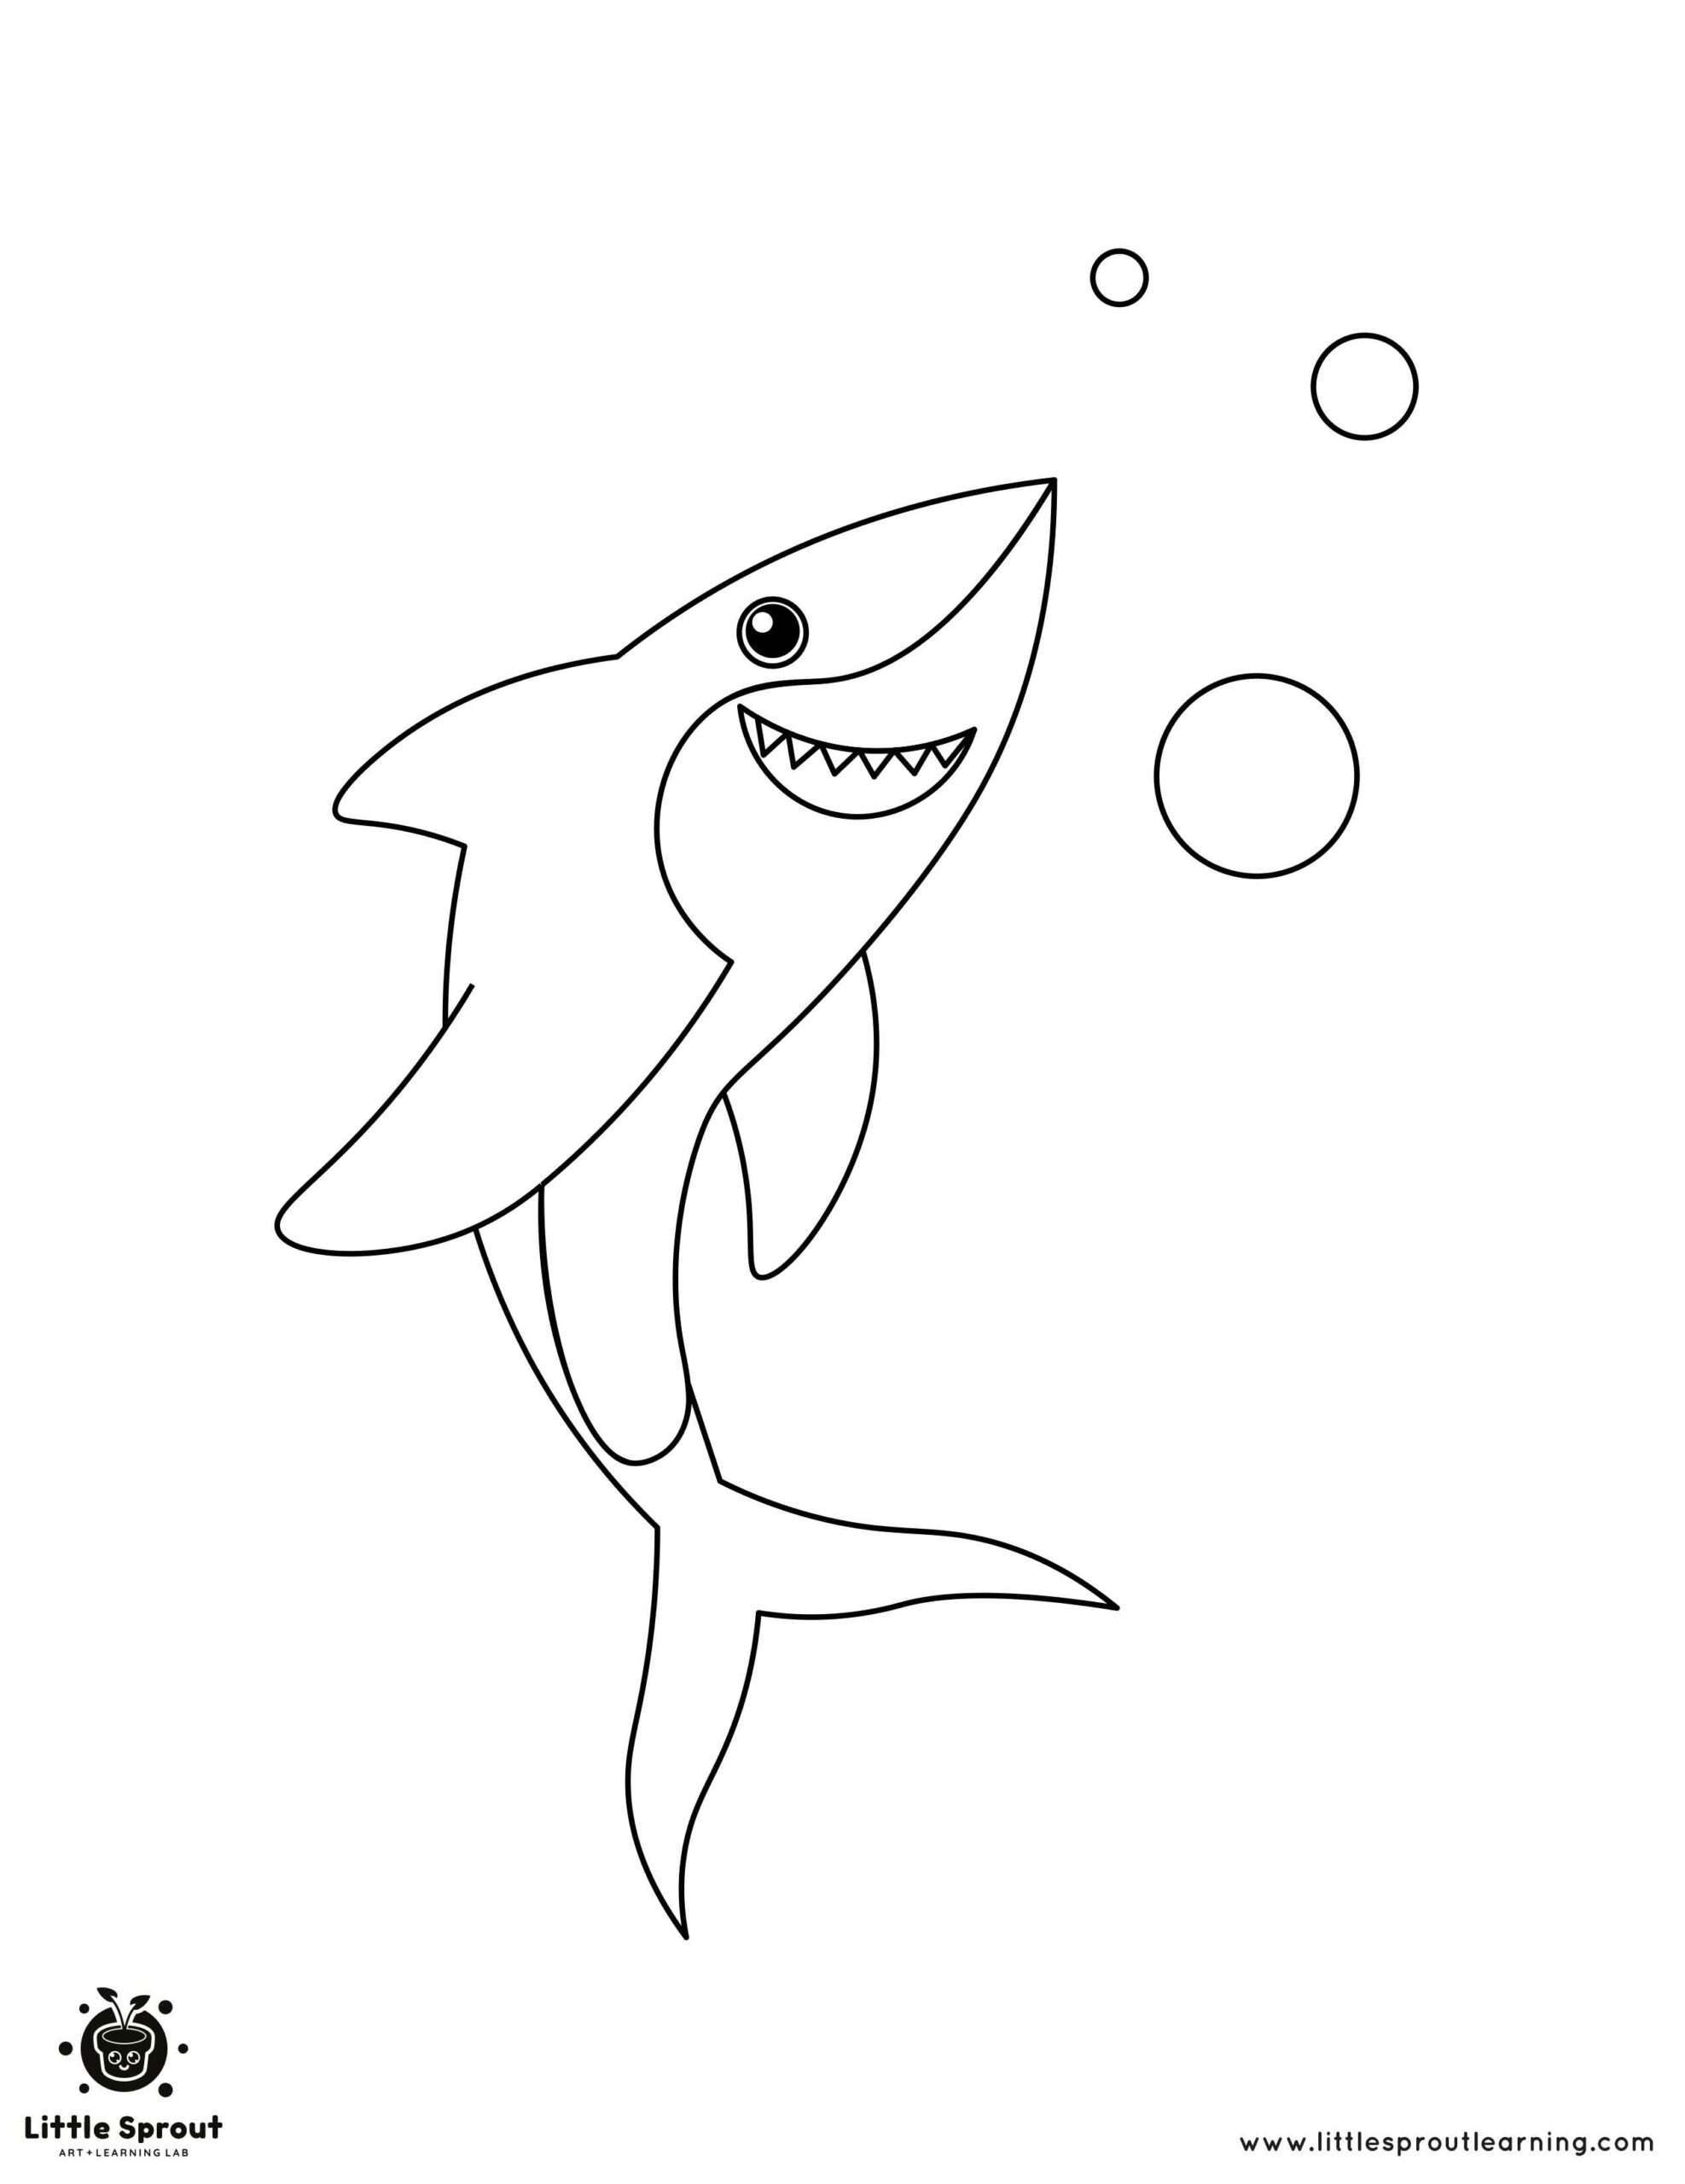 Bubbly Shark Coloring Page